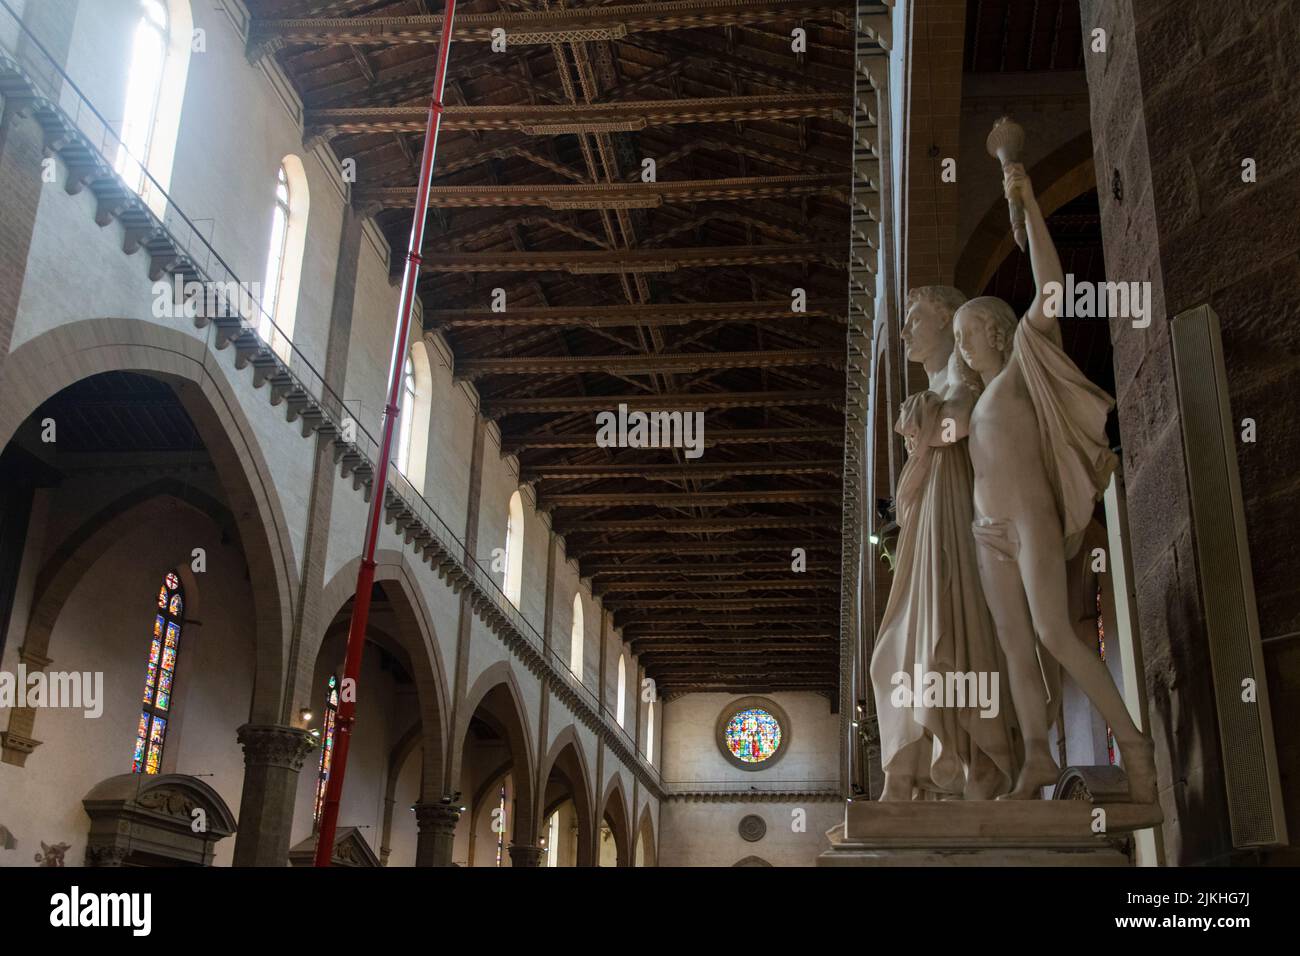 A look to the roof of the Santa Croce cathedsral, Florence Stock Photo